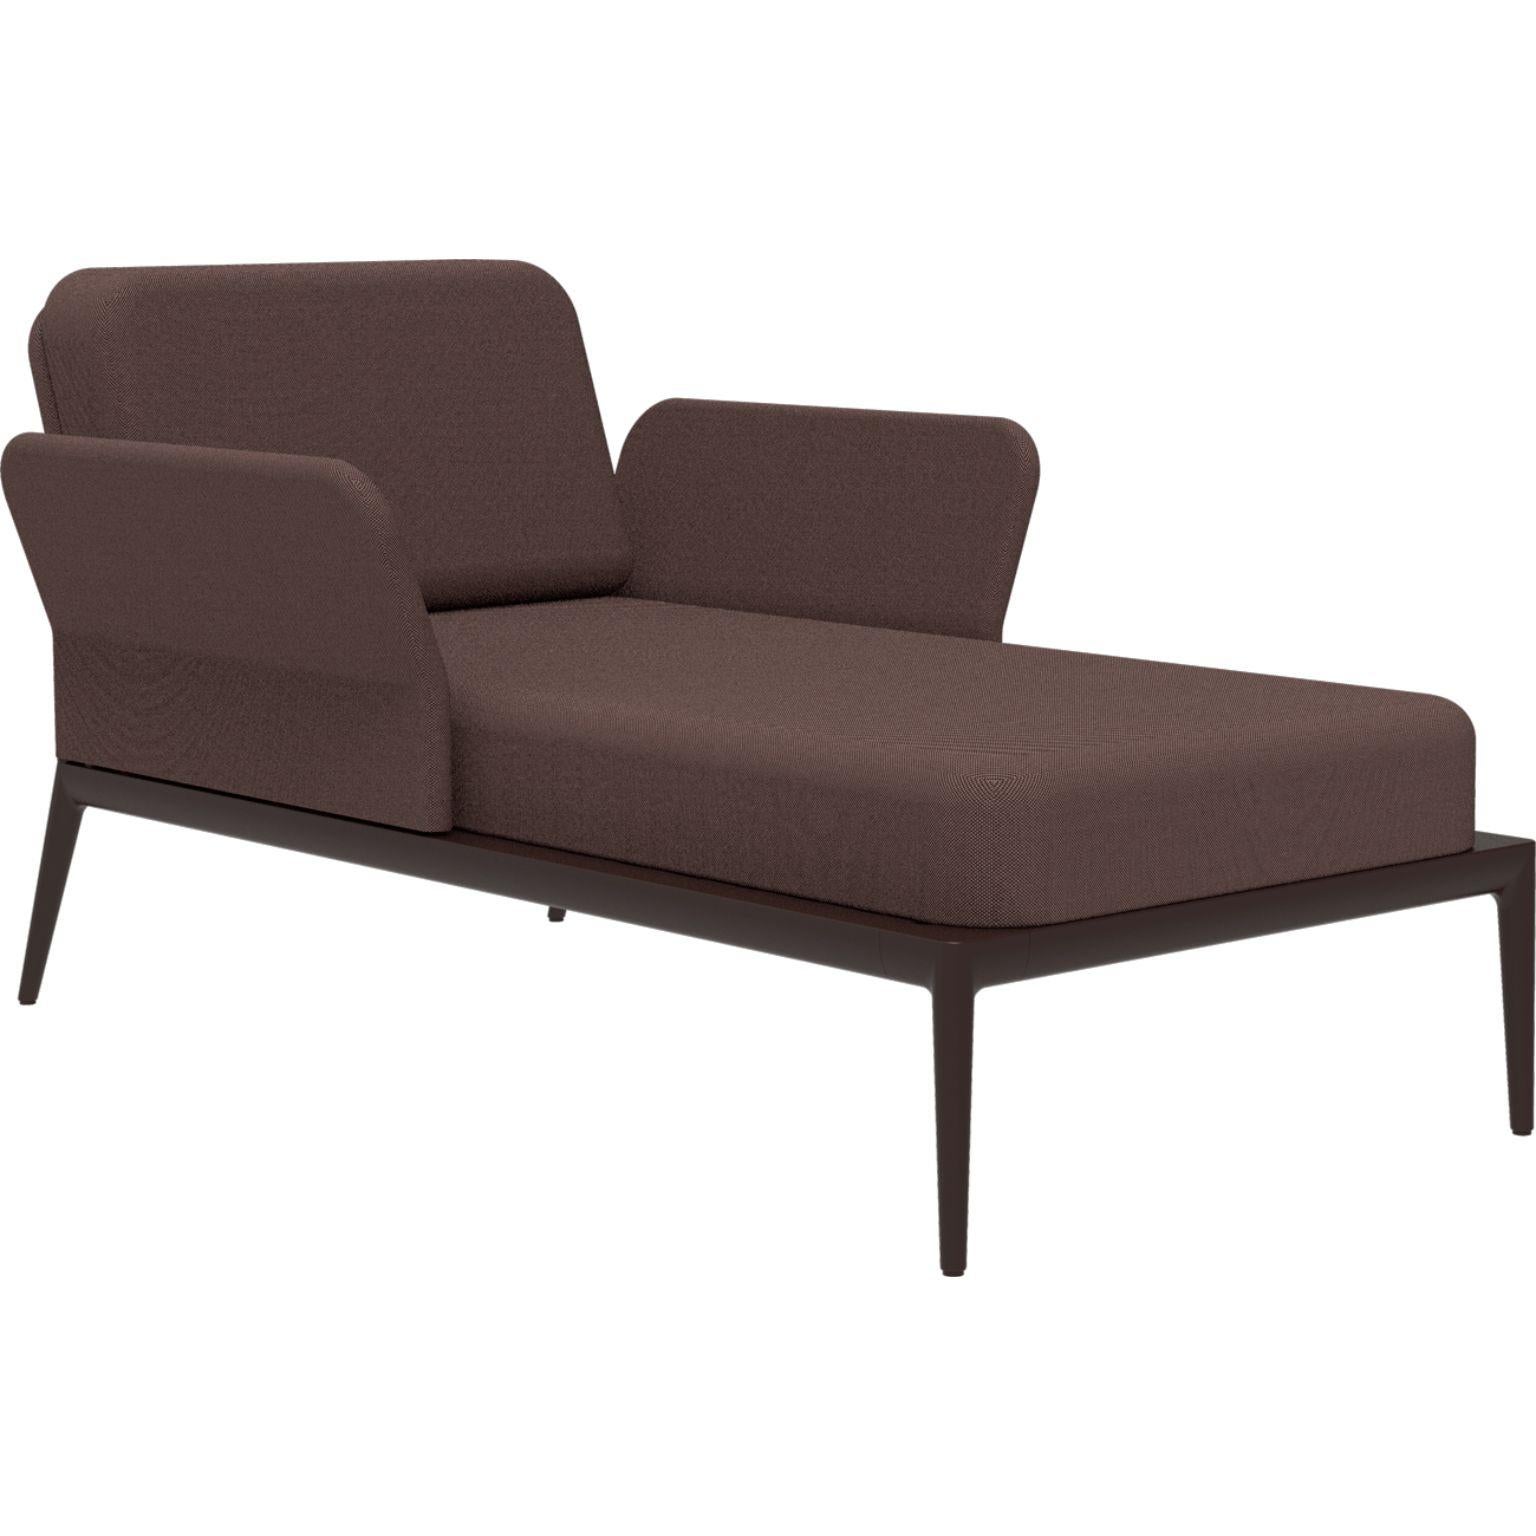 Cover Chocolate Divan by MOWEE
Dimensions: D91 x W155 x H81 cm (seat height 42 cm).
Material: Aluminum and upholstery.
Weight: 30 kg.
Also available in different colors and finishes. 

An unmistakable collection for its beauty and robustness.